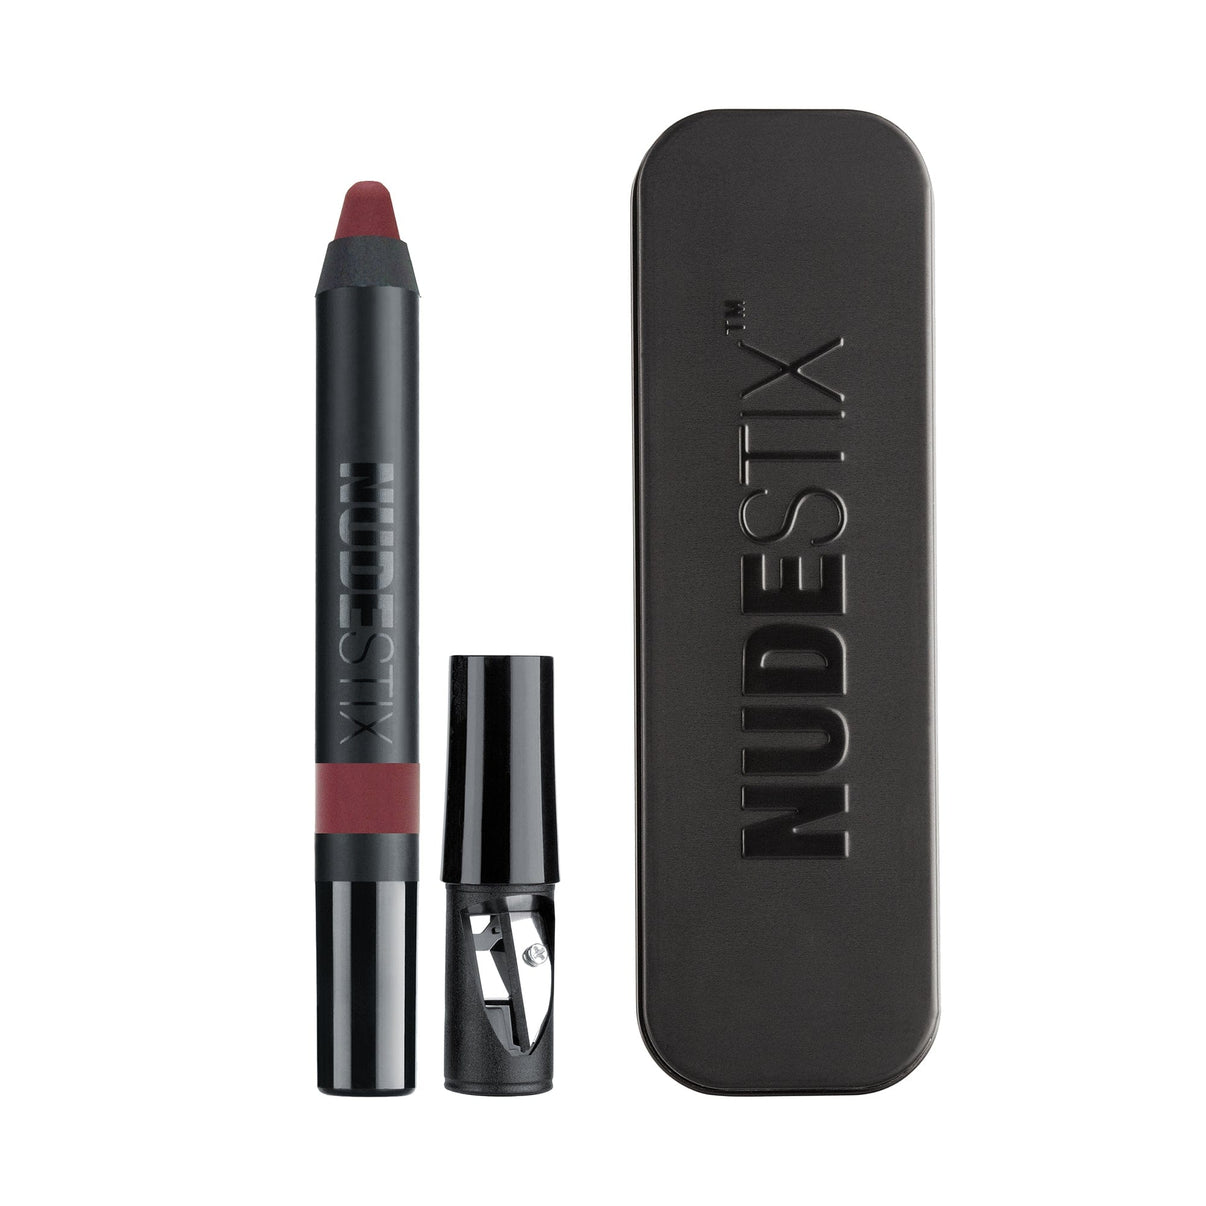 Intense Matte Lip + Cheek pencil in shade vintage with sharpener and nudestix can